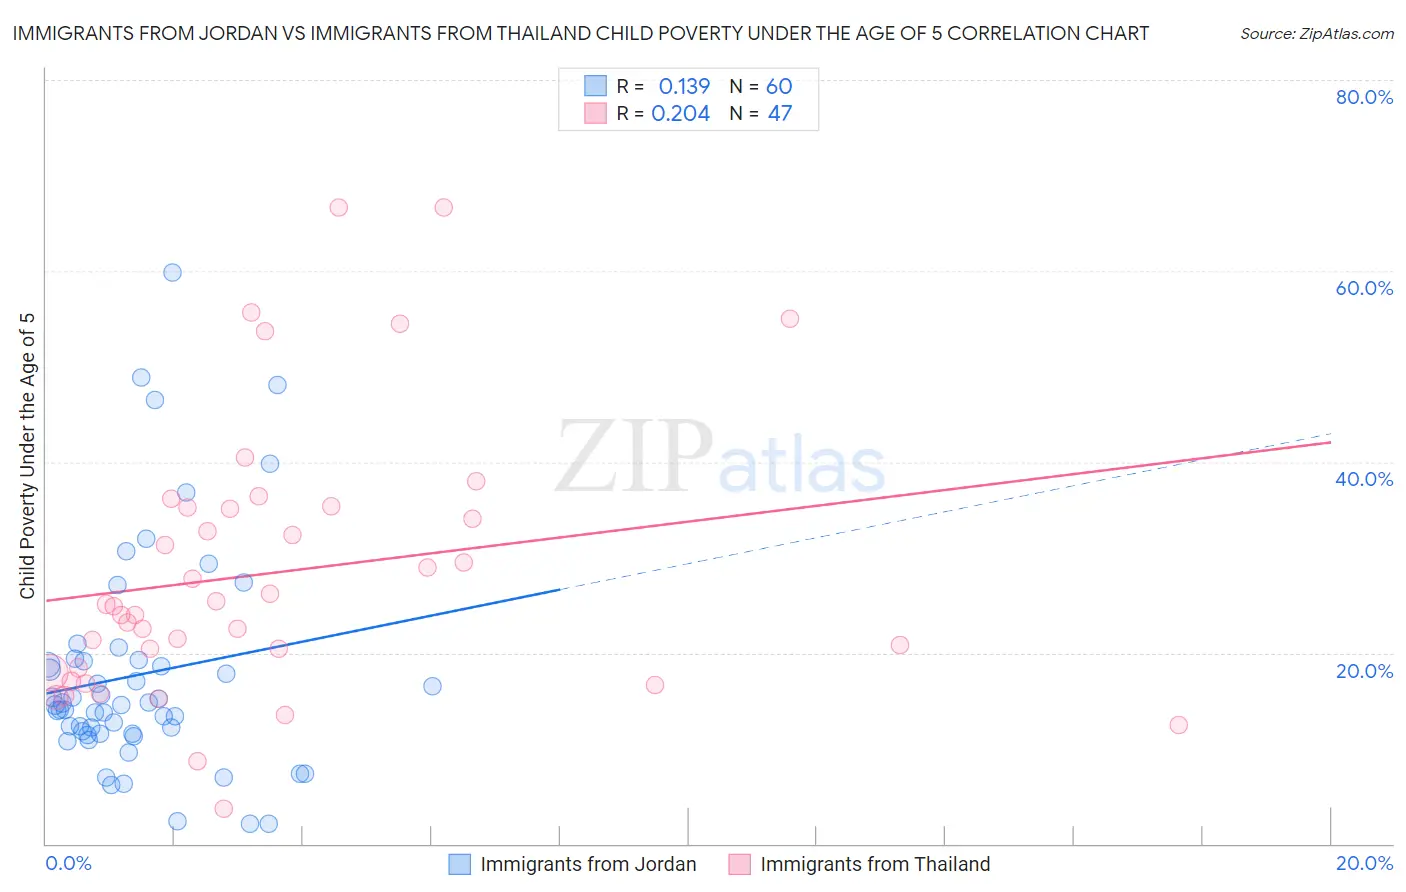 Immigrants from Jordan vs Immigrants from Thailand Child Poverty Under the Age of 5